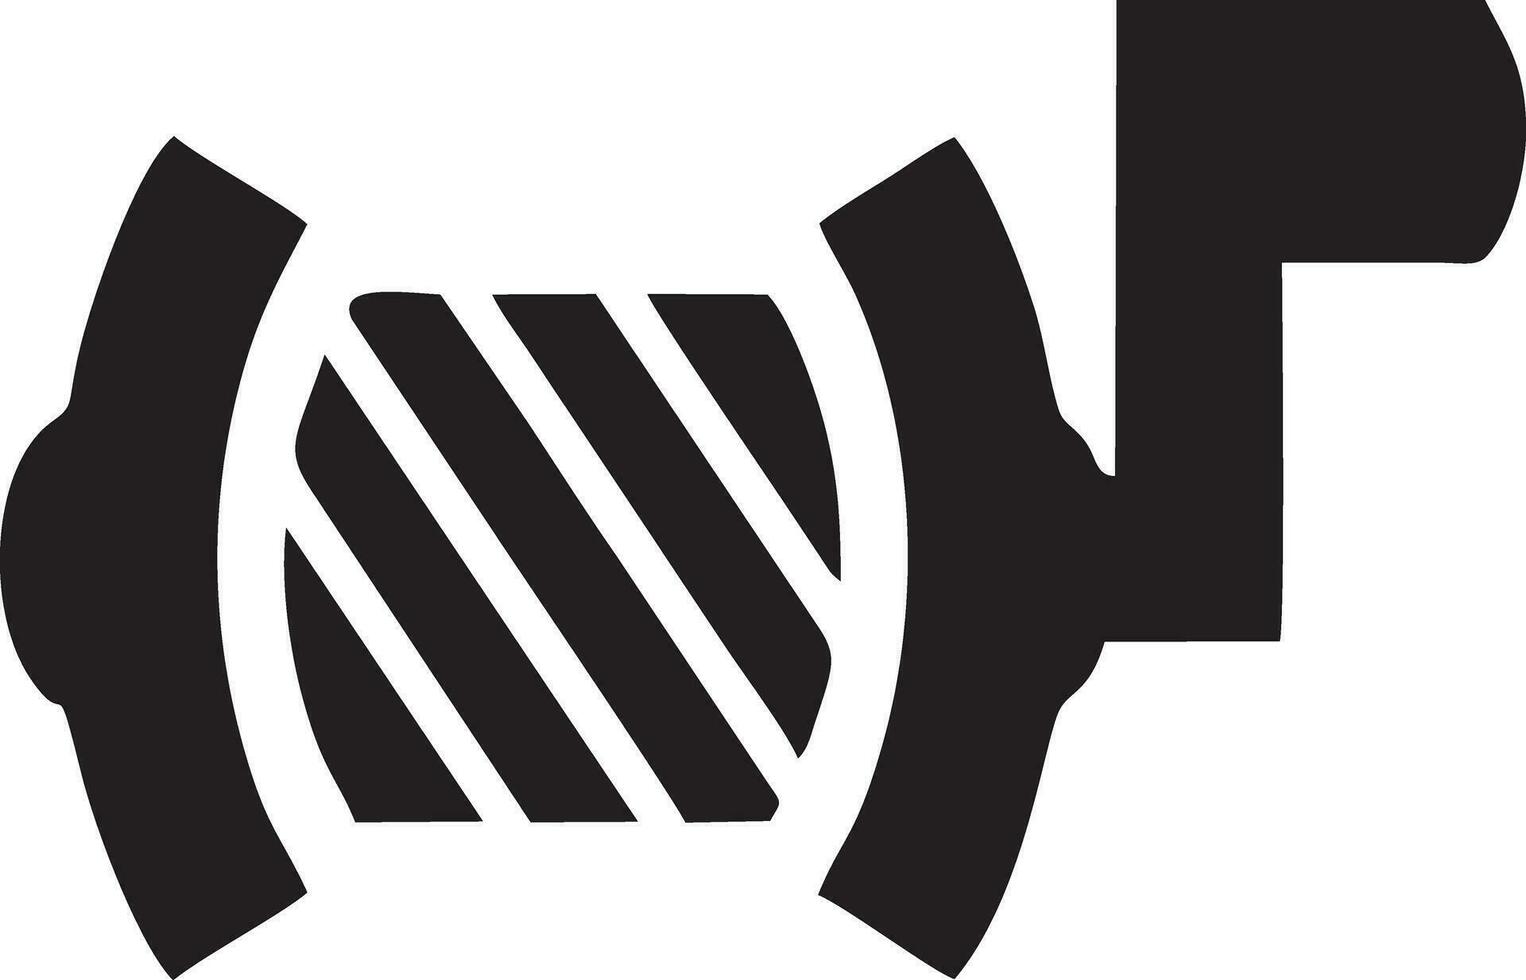 fish hook logo icon black and white vector